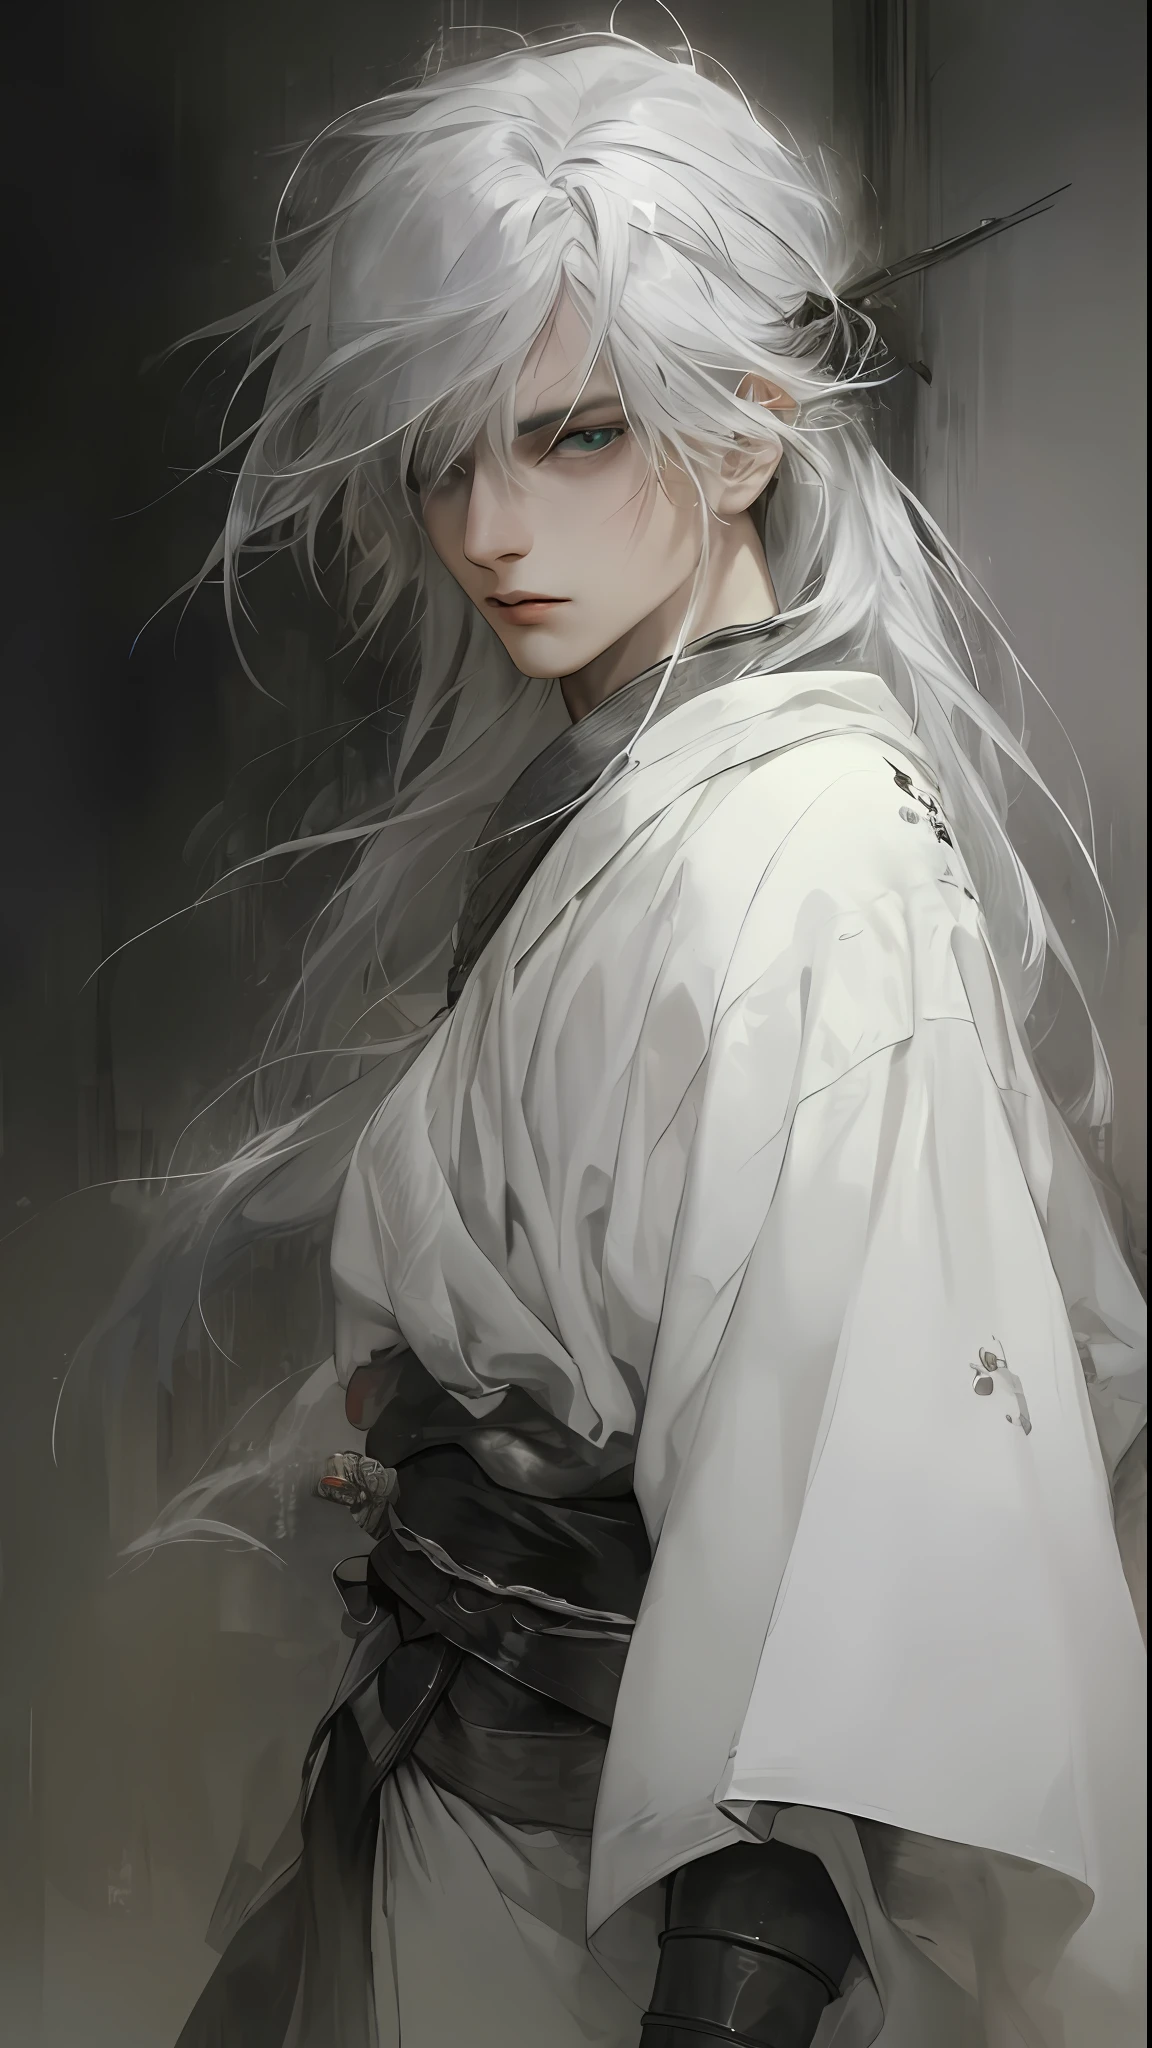 a close up of a person with a white hair and a sword，white-haired god，long  white hair，Long white hair，Guviz-style artwork，White hair，Guviz，handsome guy in demon killer art，beautiful character painting，by Yang J，whaite hair，Guvitz on the Pixif Art Station，anime figure，blue color eyes，Blood stains on the neck，kiss marks，Cold handsome guy